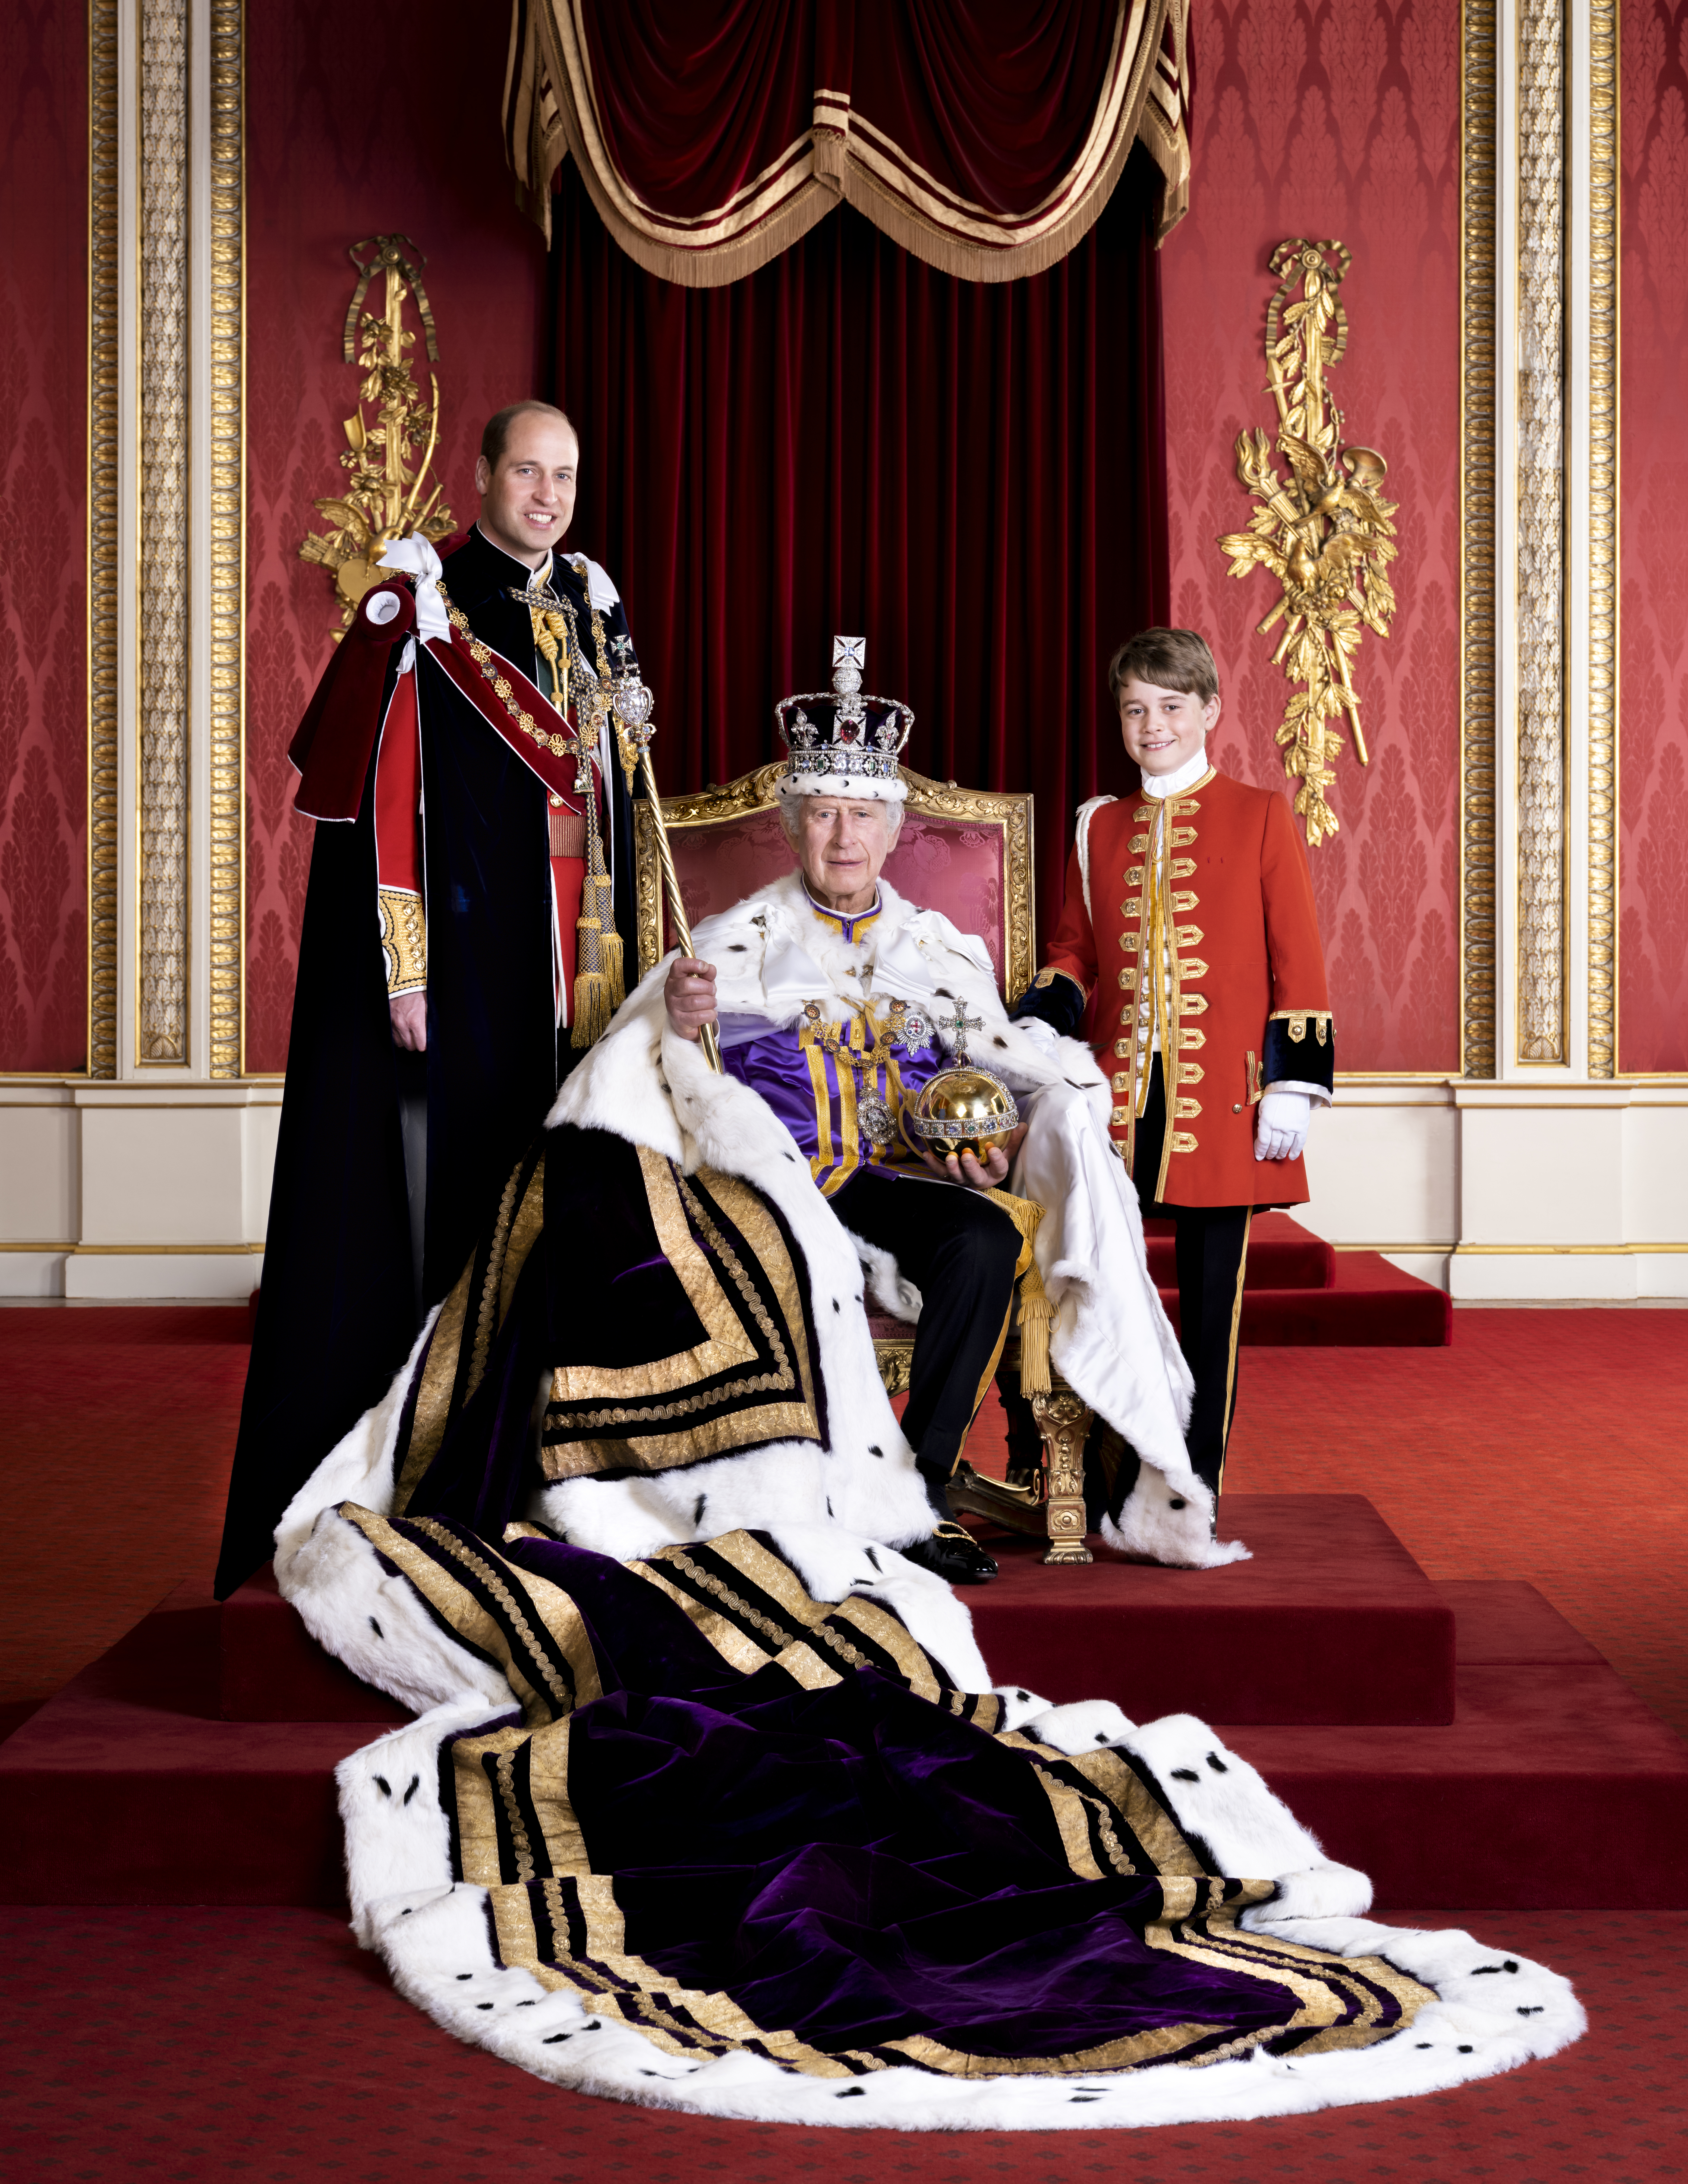 King Charles III, Prince William, and Prince George at the King's coronation on May 6, 2023 in the Throne room at Buckingham Palace | Source: Getty Images